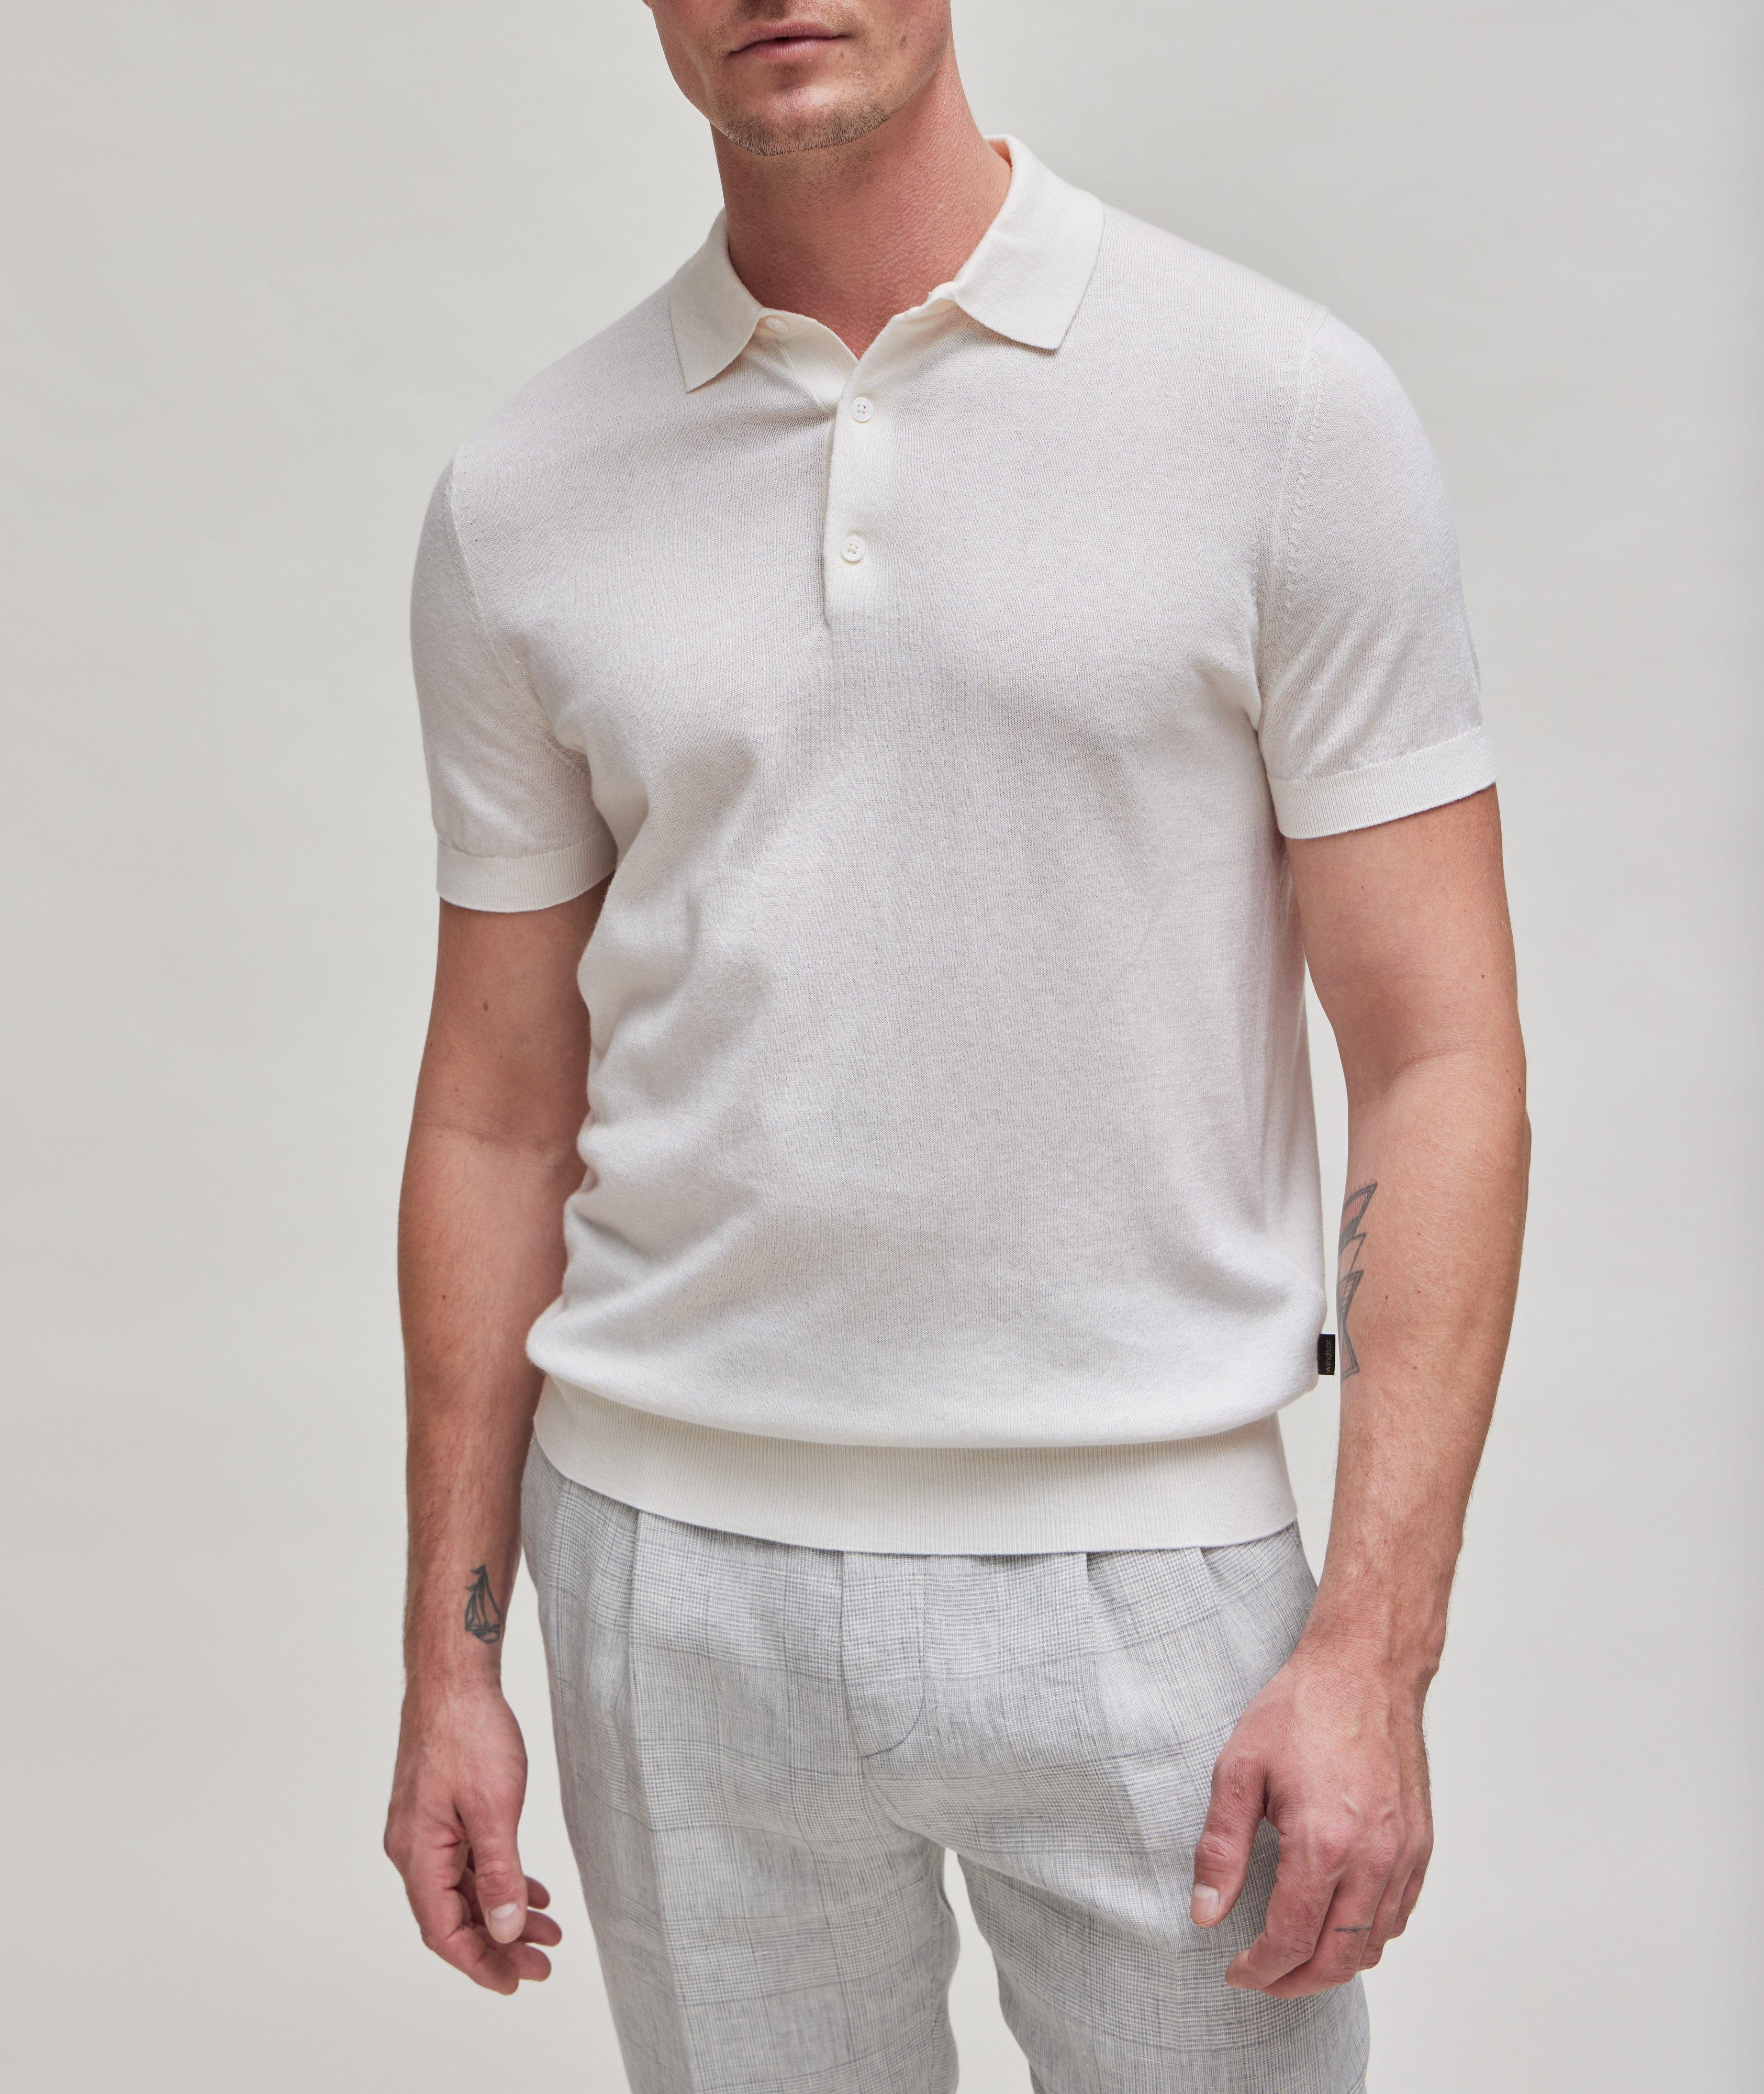 Cashmino Cashmere-Cotton Knitted Polo image 1